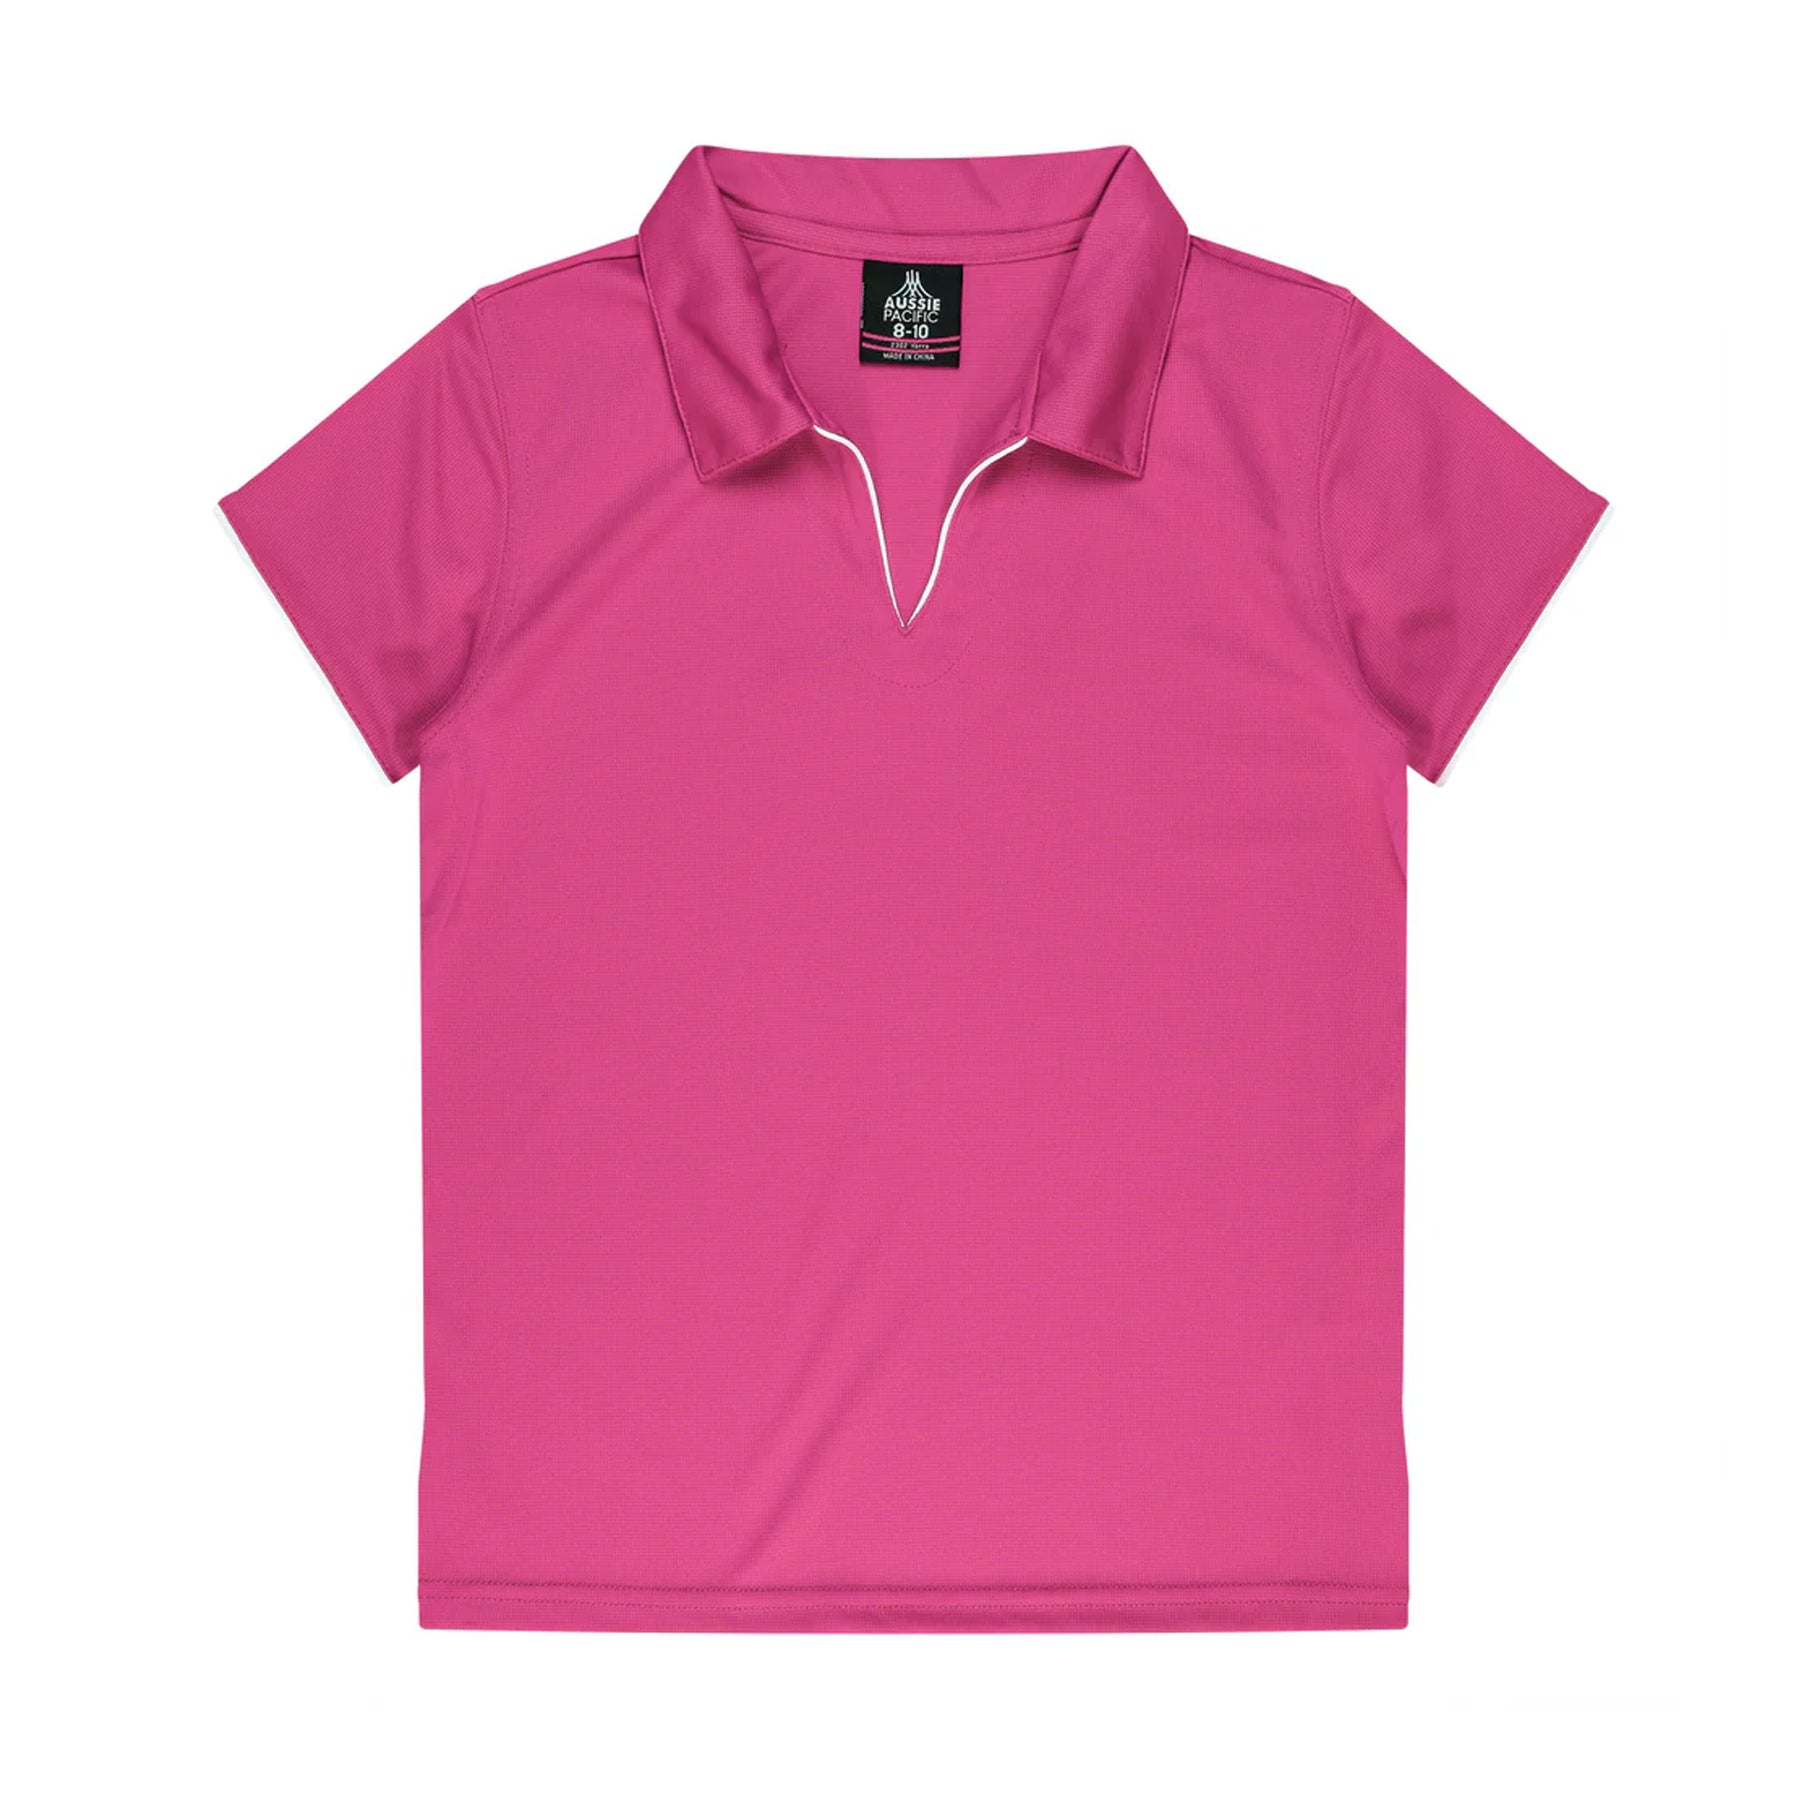 aussie pacific yarra ladies polo in pink white